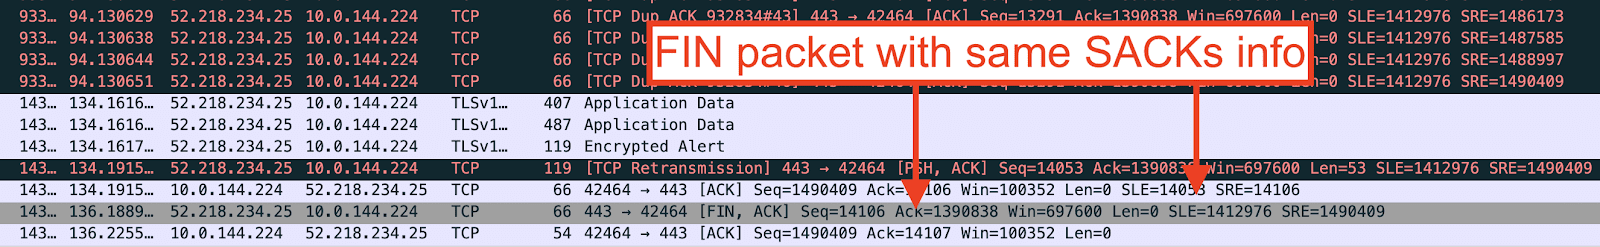 FIN packet with SACK information, indicating that it had not received missing data.